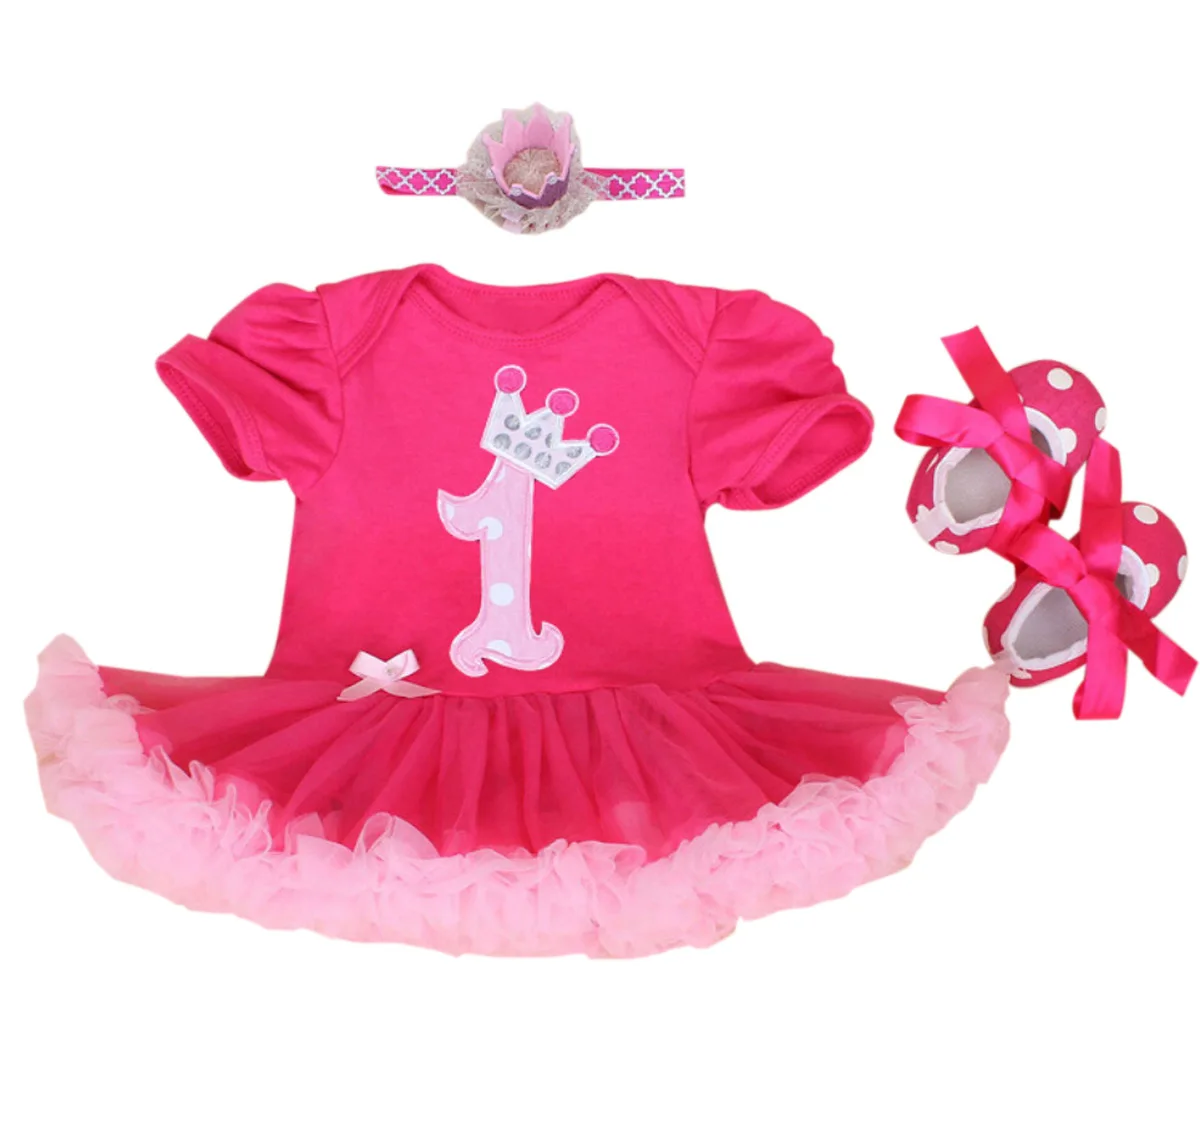 

Baby Girls Number 1 Crown First Birthday Tutu Dress with Polka Dots Shoes Hot Pink Bling Crown Headband